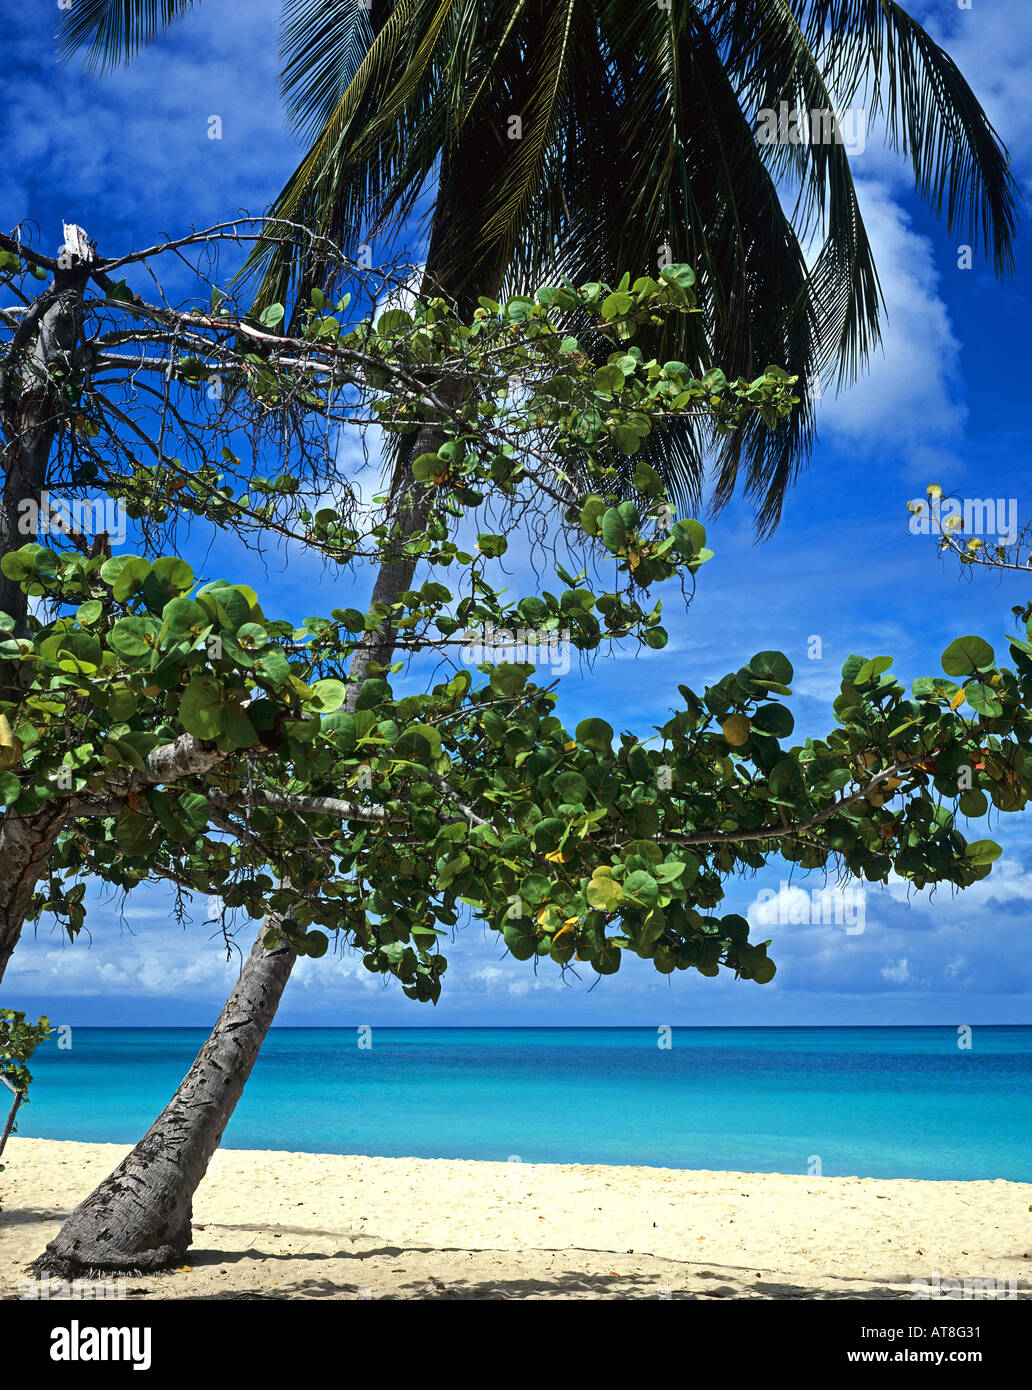 Seagrape and palm tree at Anse Vieux-Fort beach, Marie-Galante island, Guadeloupe, French West Indies Stock Photo